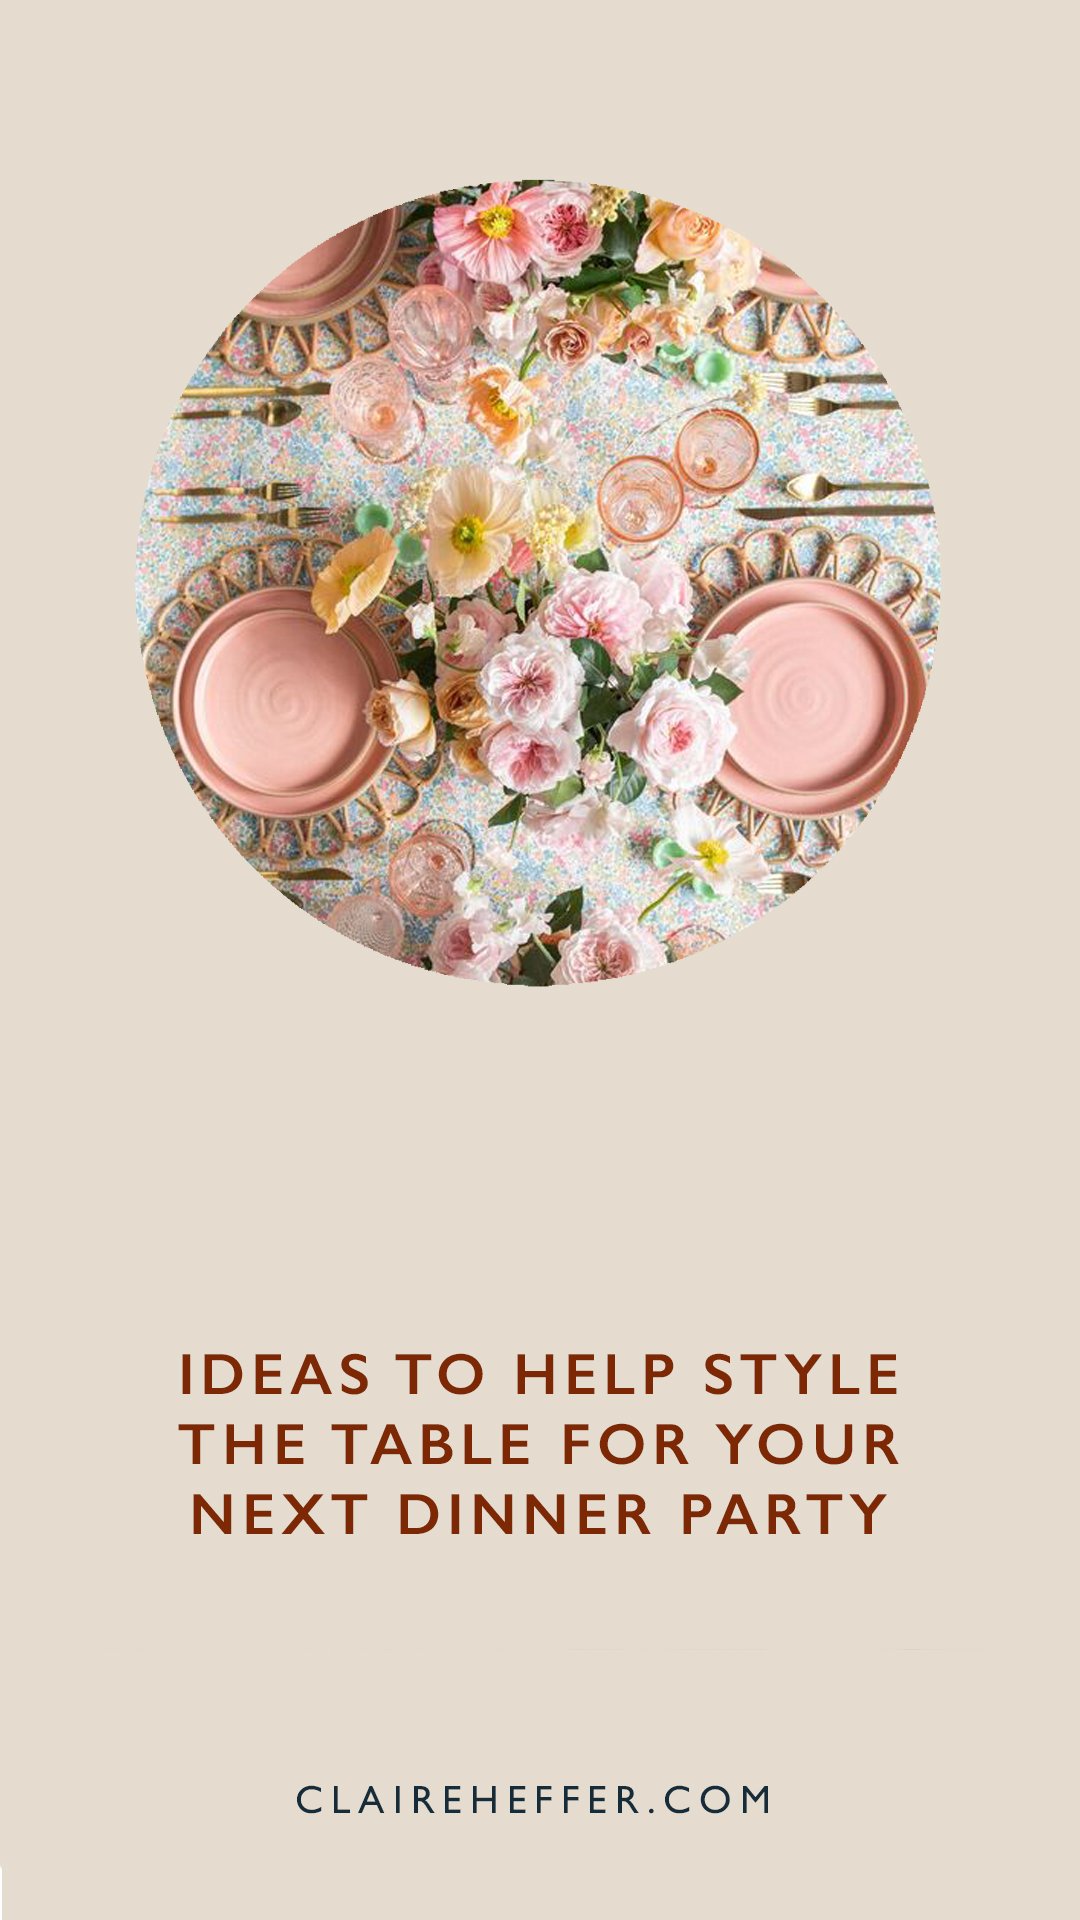 _TABLE STYLING2.jpg